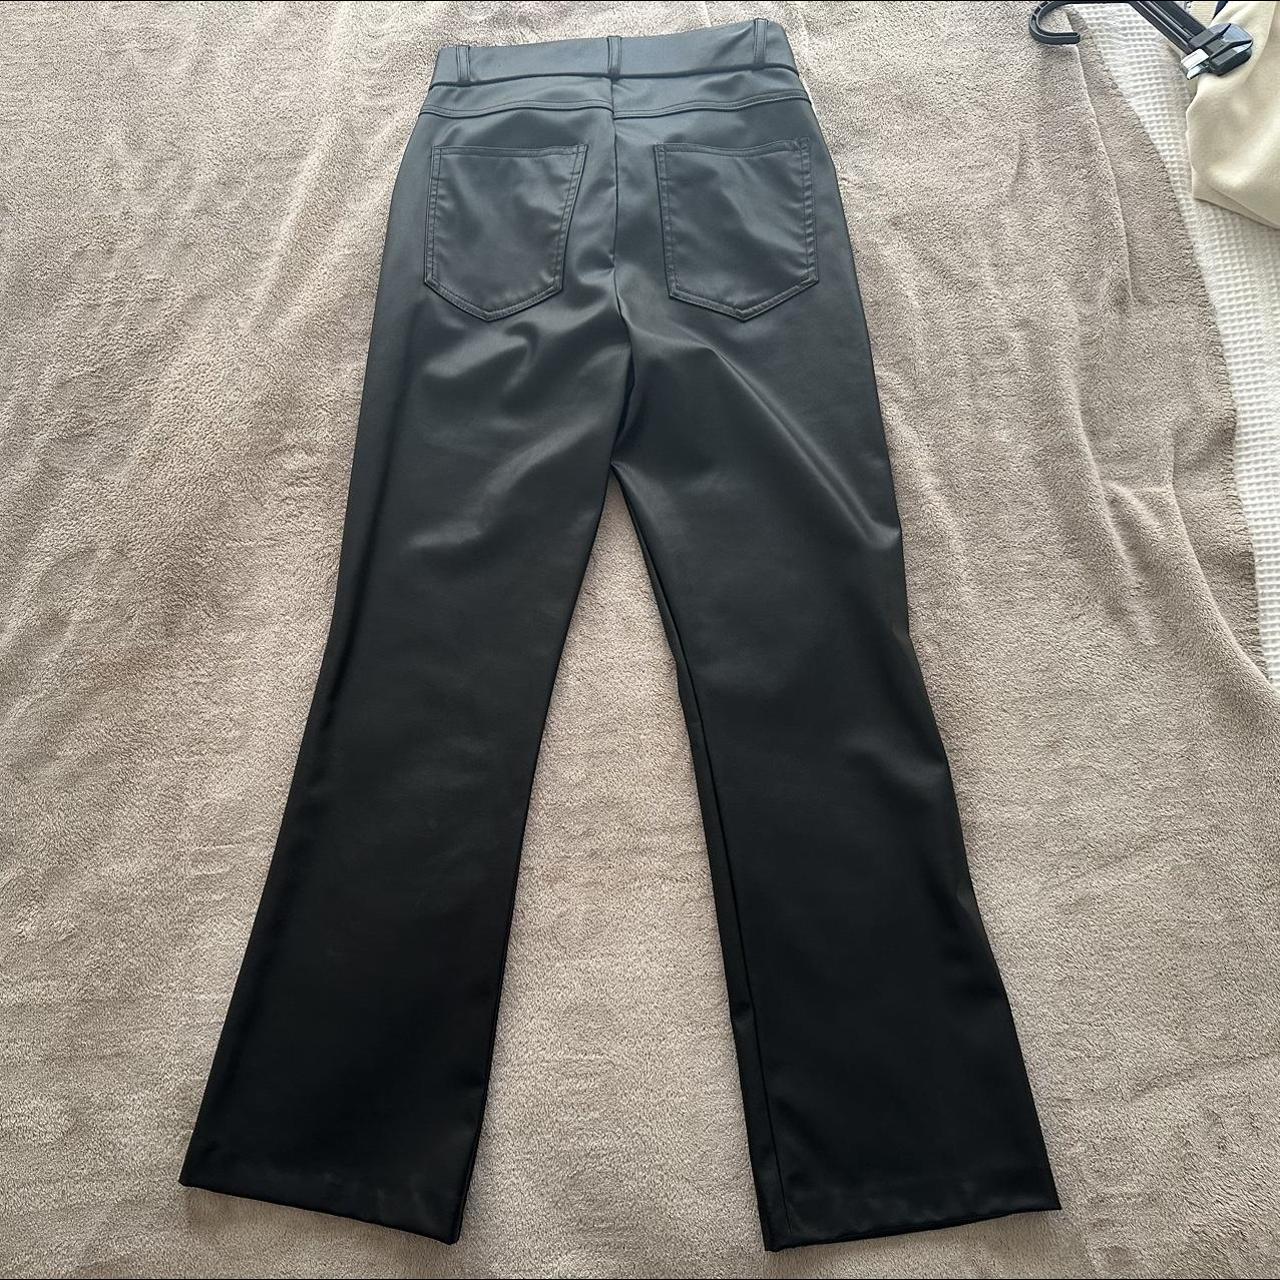 Zara Leather Pants Size S In great condition however... - Depop